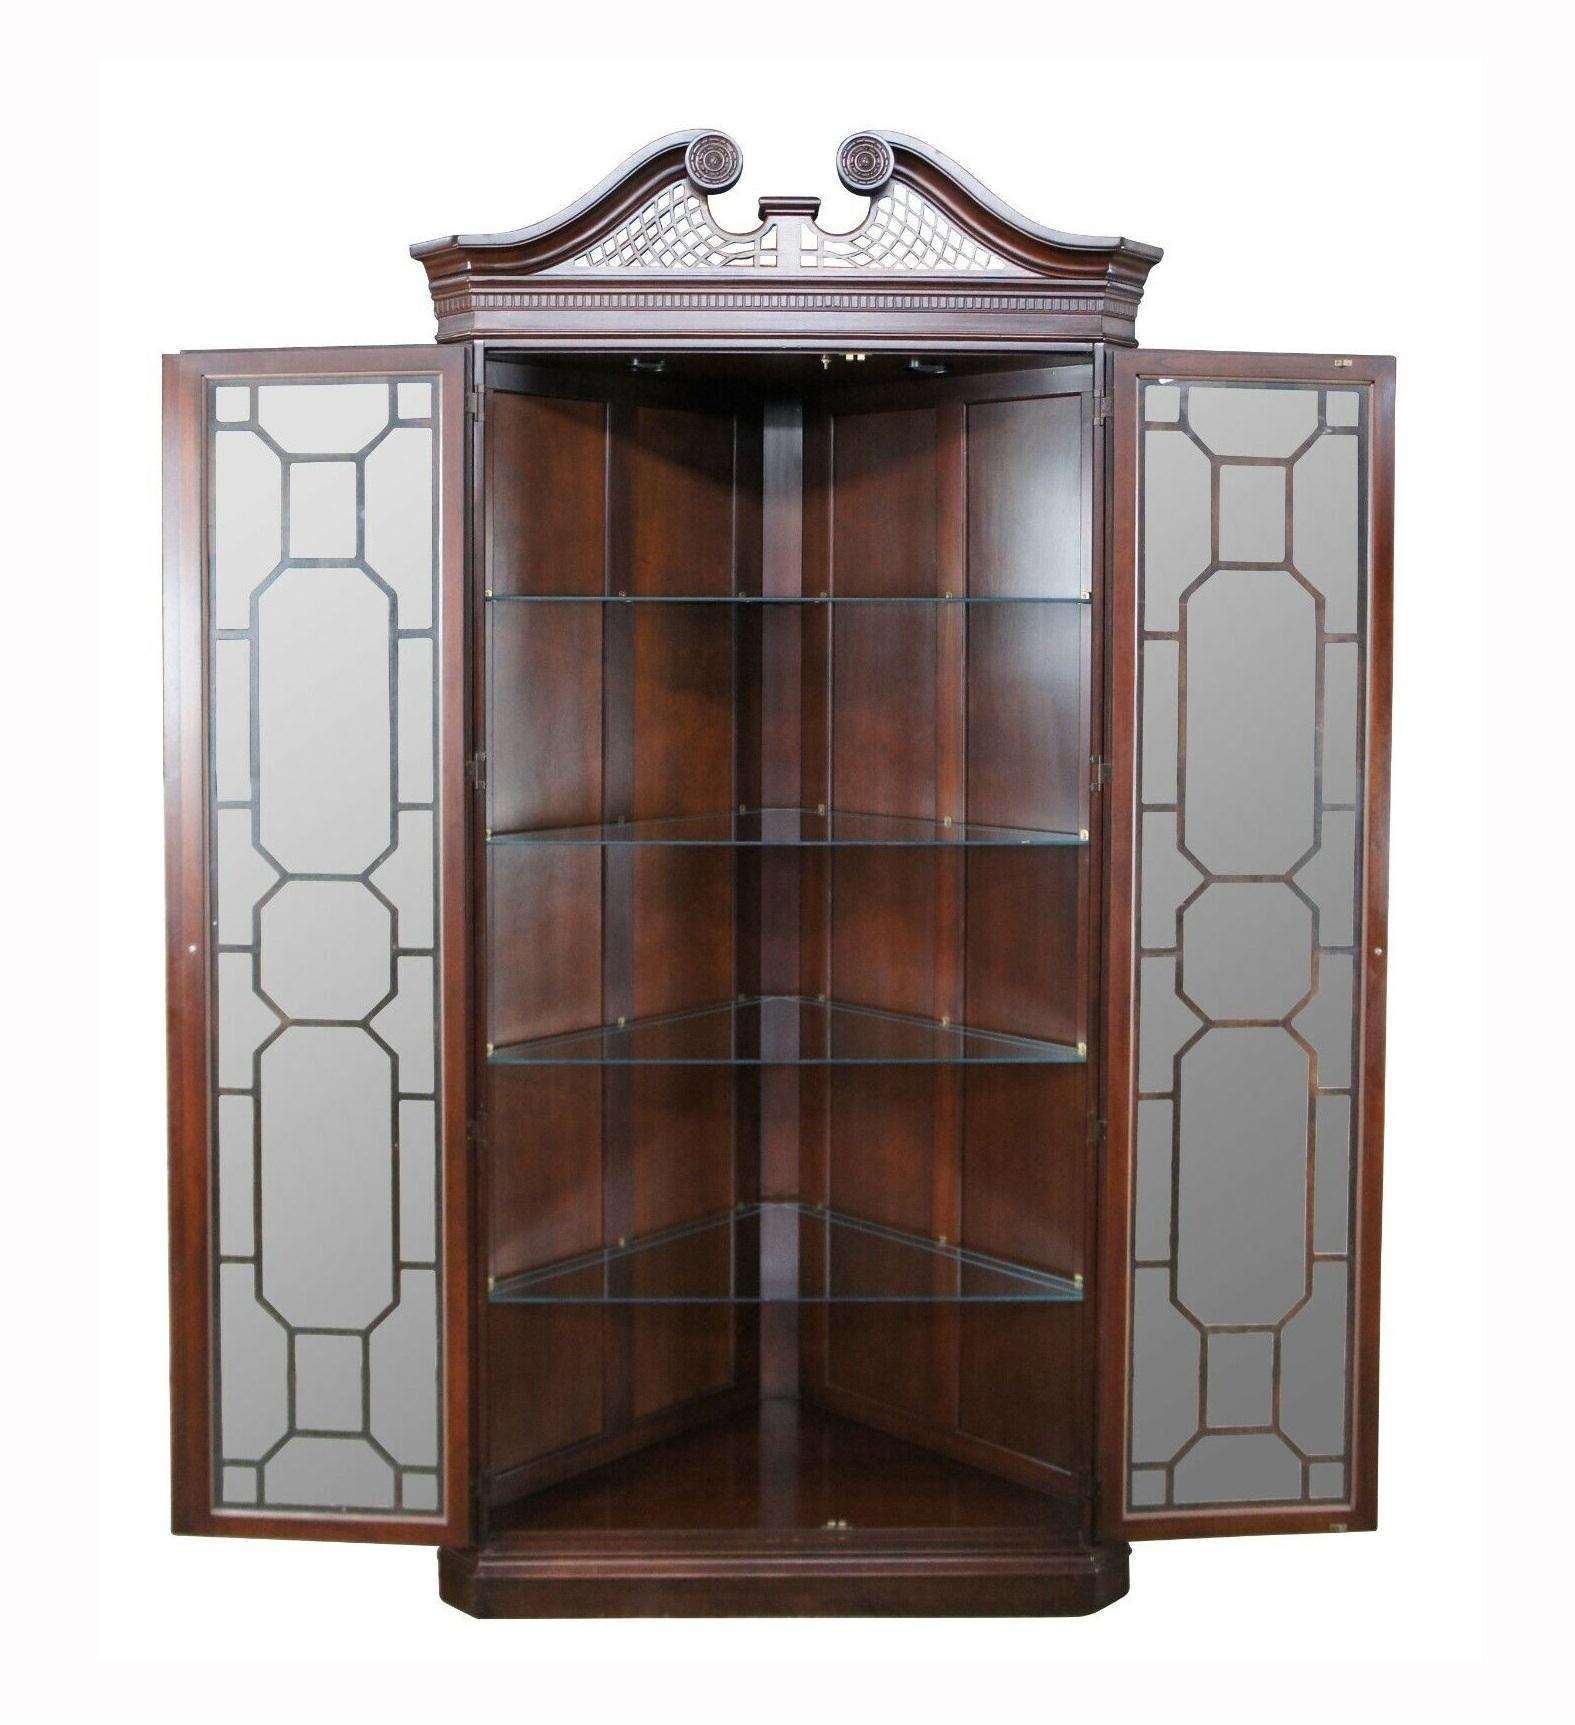 air of Harden Furniture American Cherry Illuminated corner cabinet, circa 1980s. Features Chippendale or Georgian styling with fretwork trimmed glass doors, an open pediment with pierced lattice work and dentil molding. Includes four glass shelves